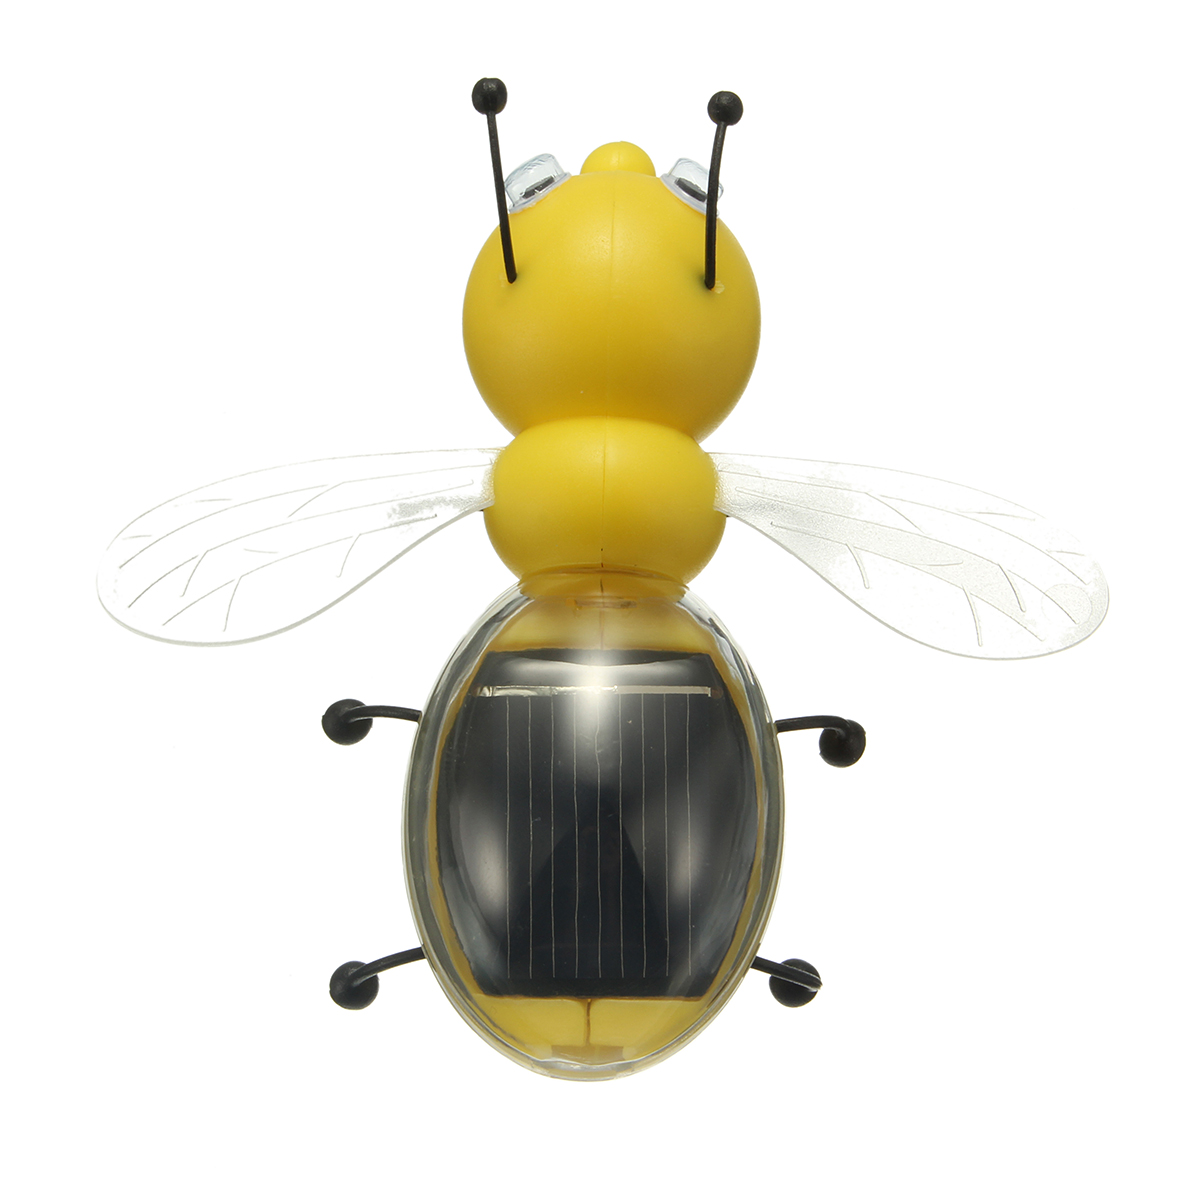 Educational-Solar-Powered-Bee-Ant-Robot-Toy-Gadget-Gift-1965213-5